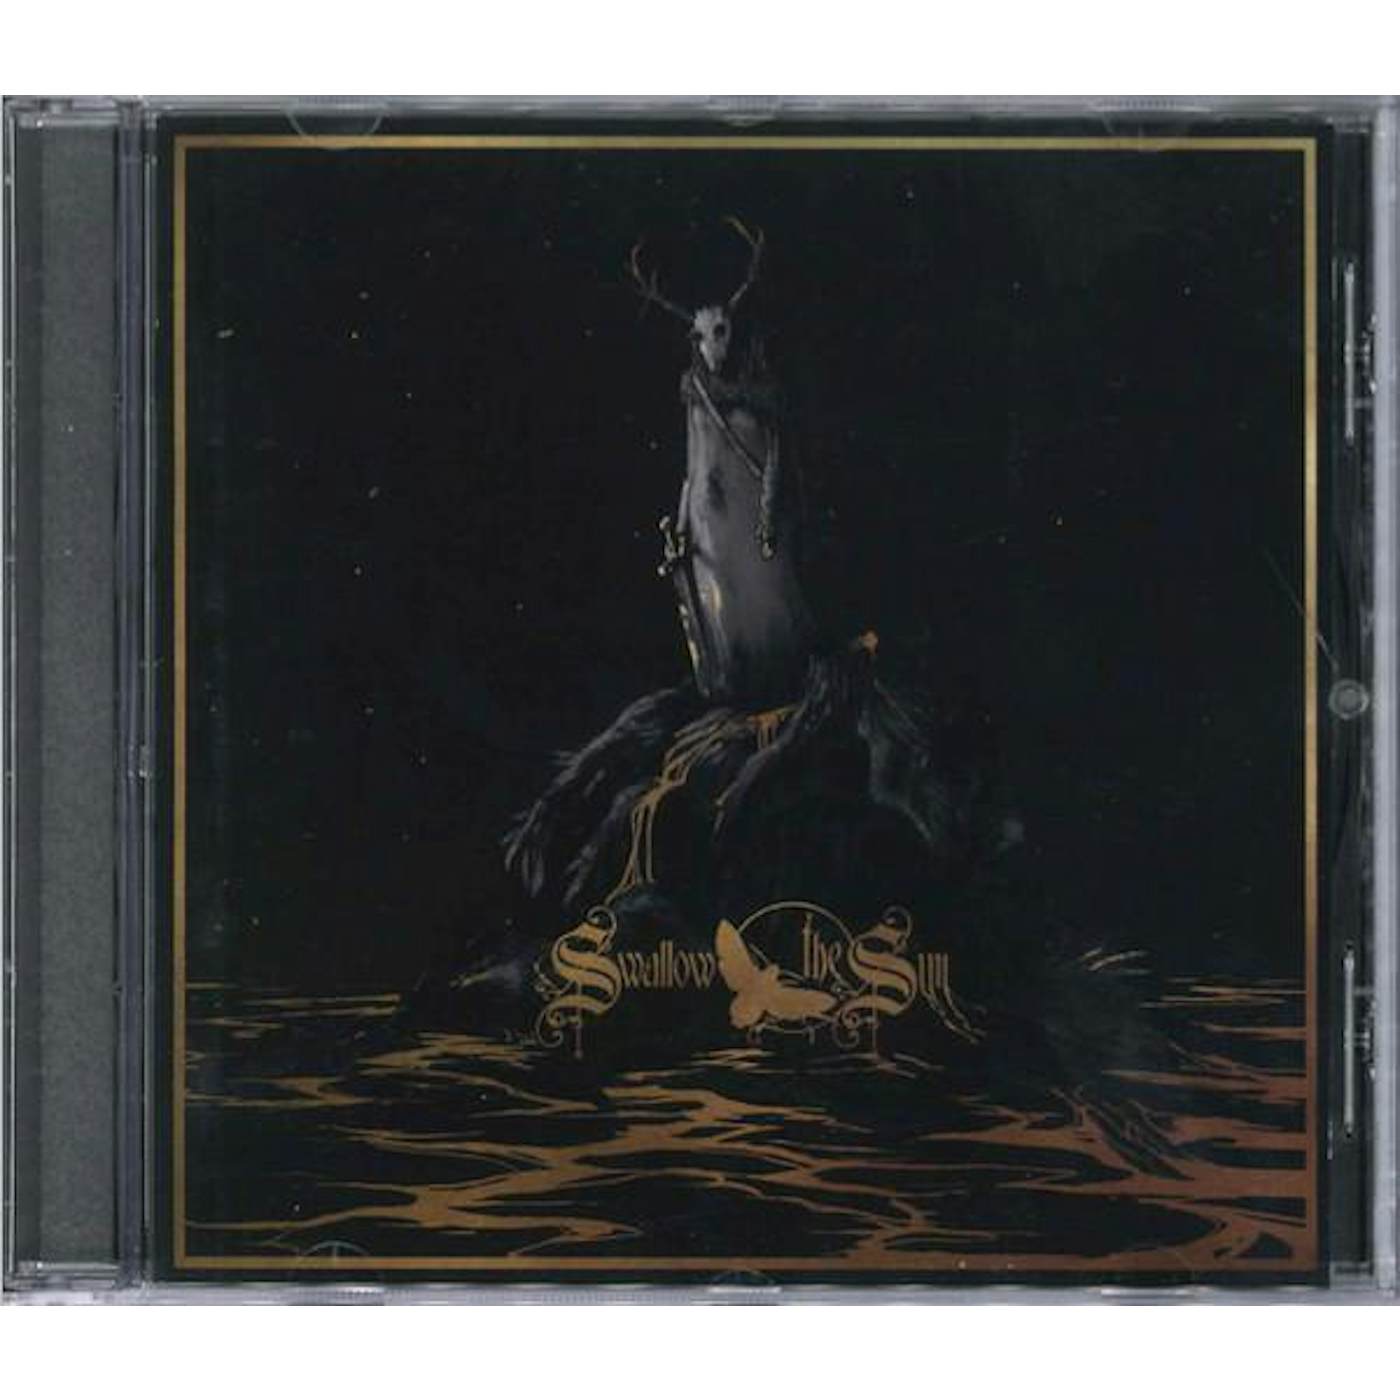 Swallow The Sun WHEN A SHADOW IS FORCED INTO THE LIGHT CD